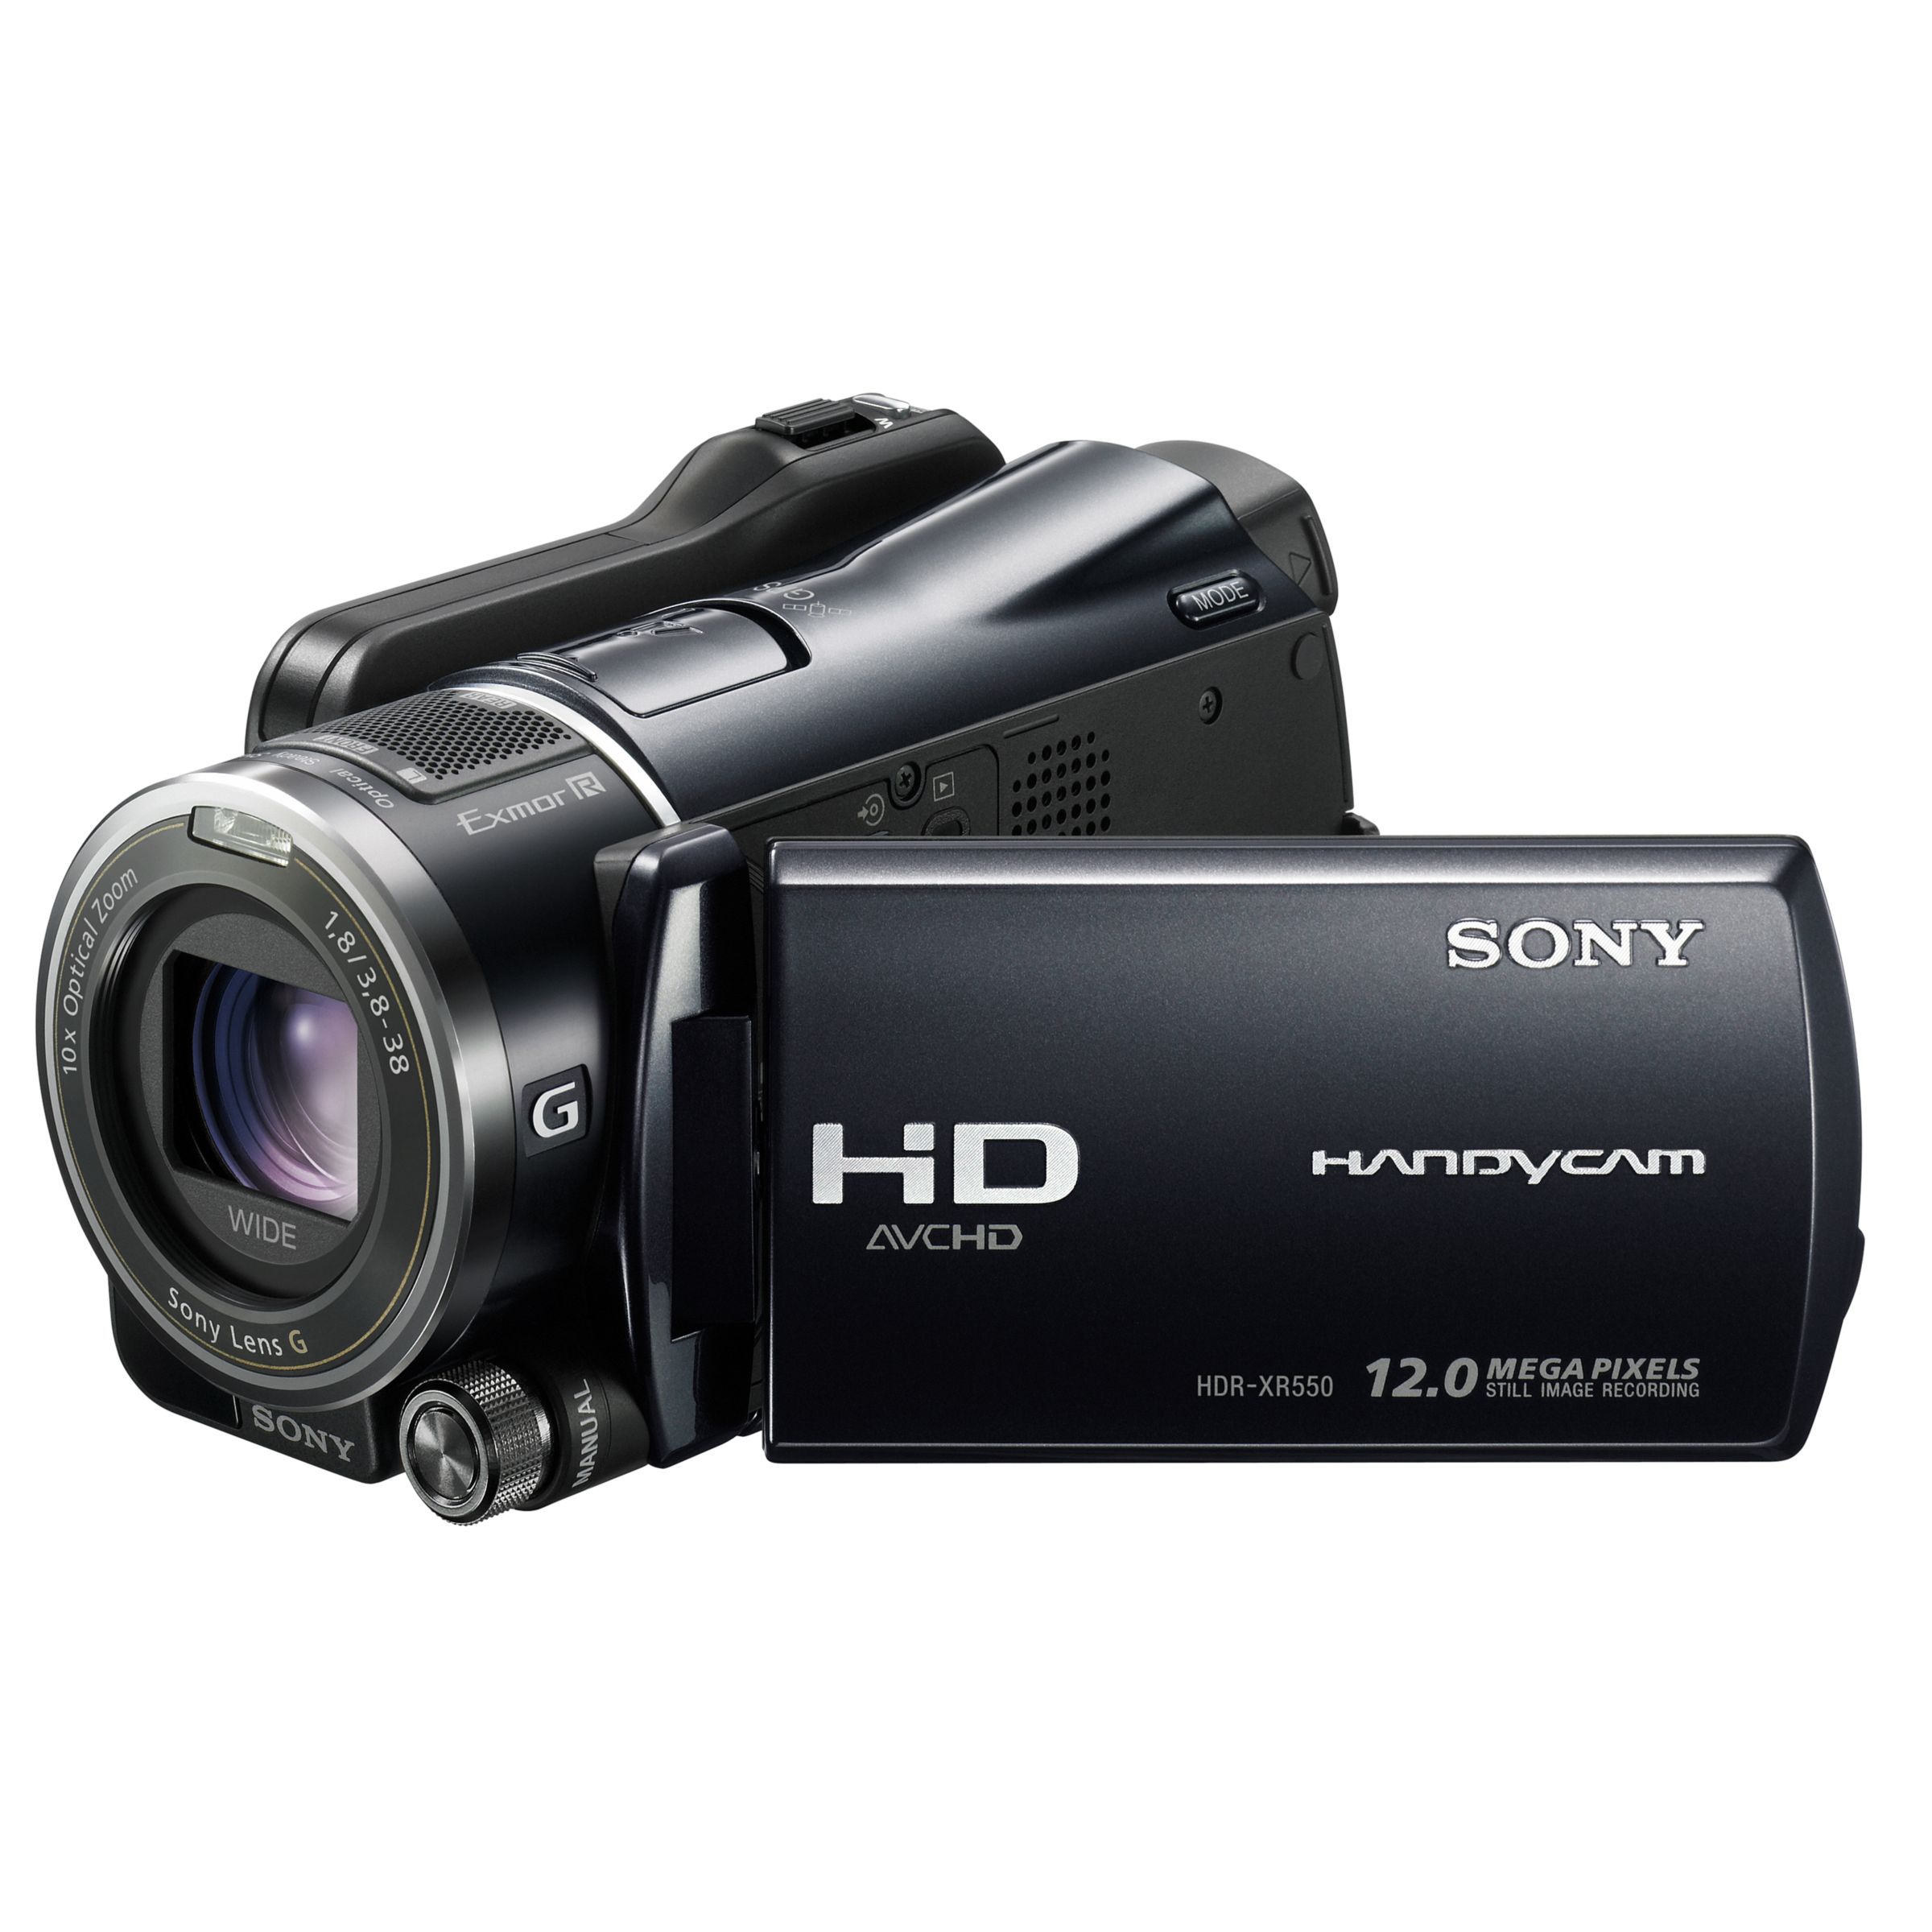 Sony HDR-XR550VE High Definition 240GB Hard Drive/Memory Card Camcorder, Black at JohnLewis